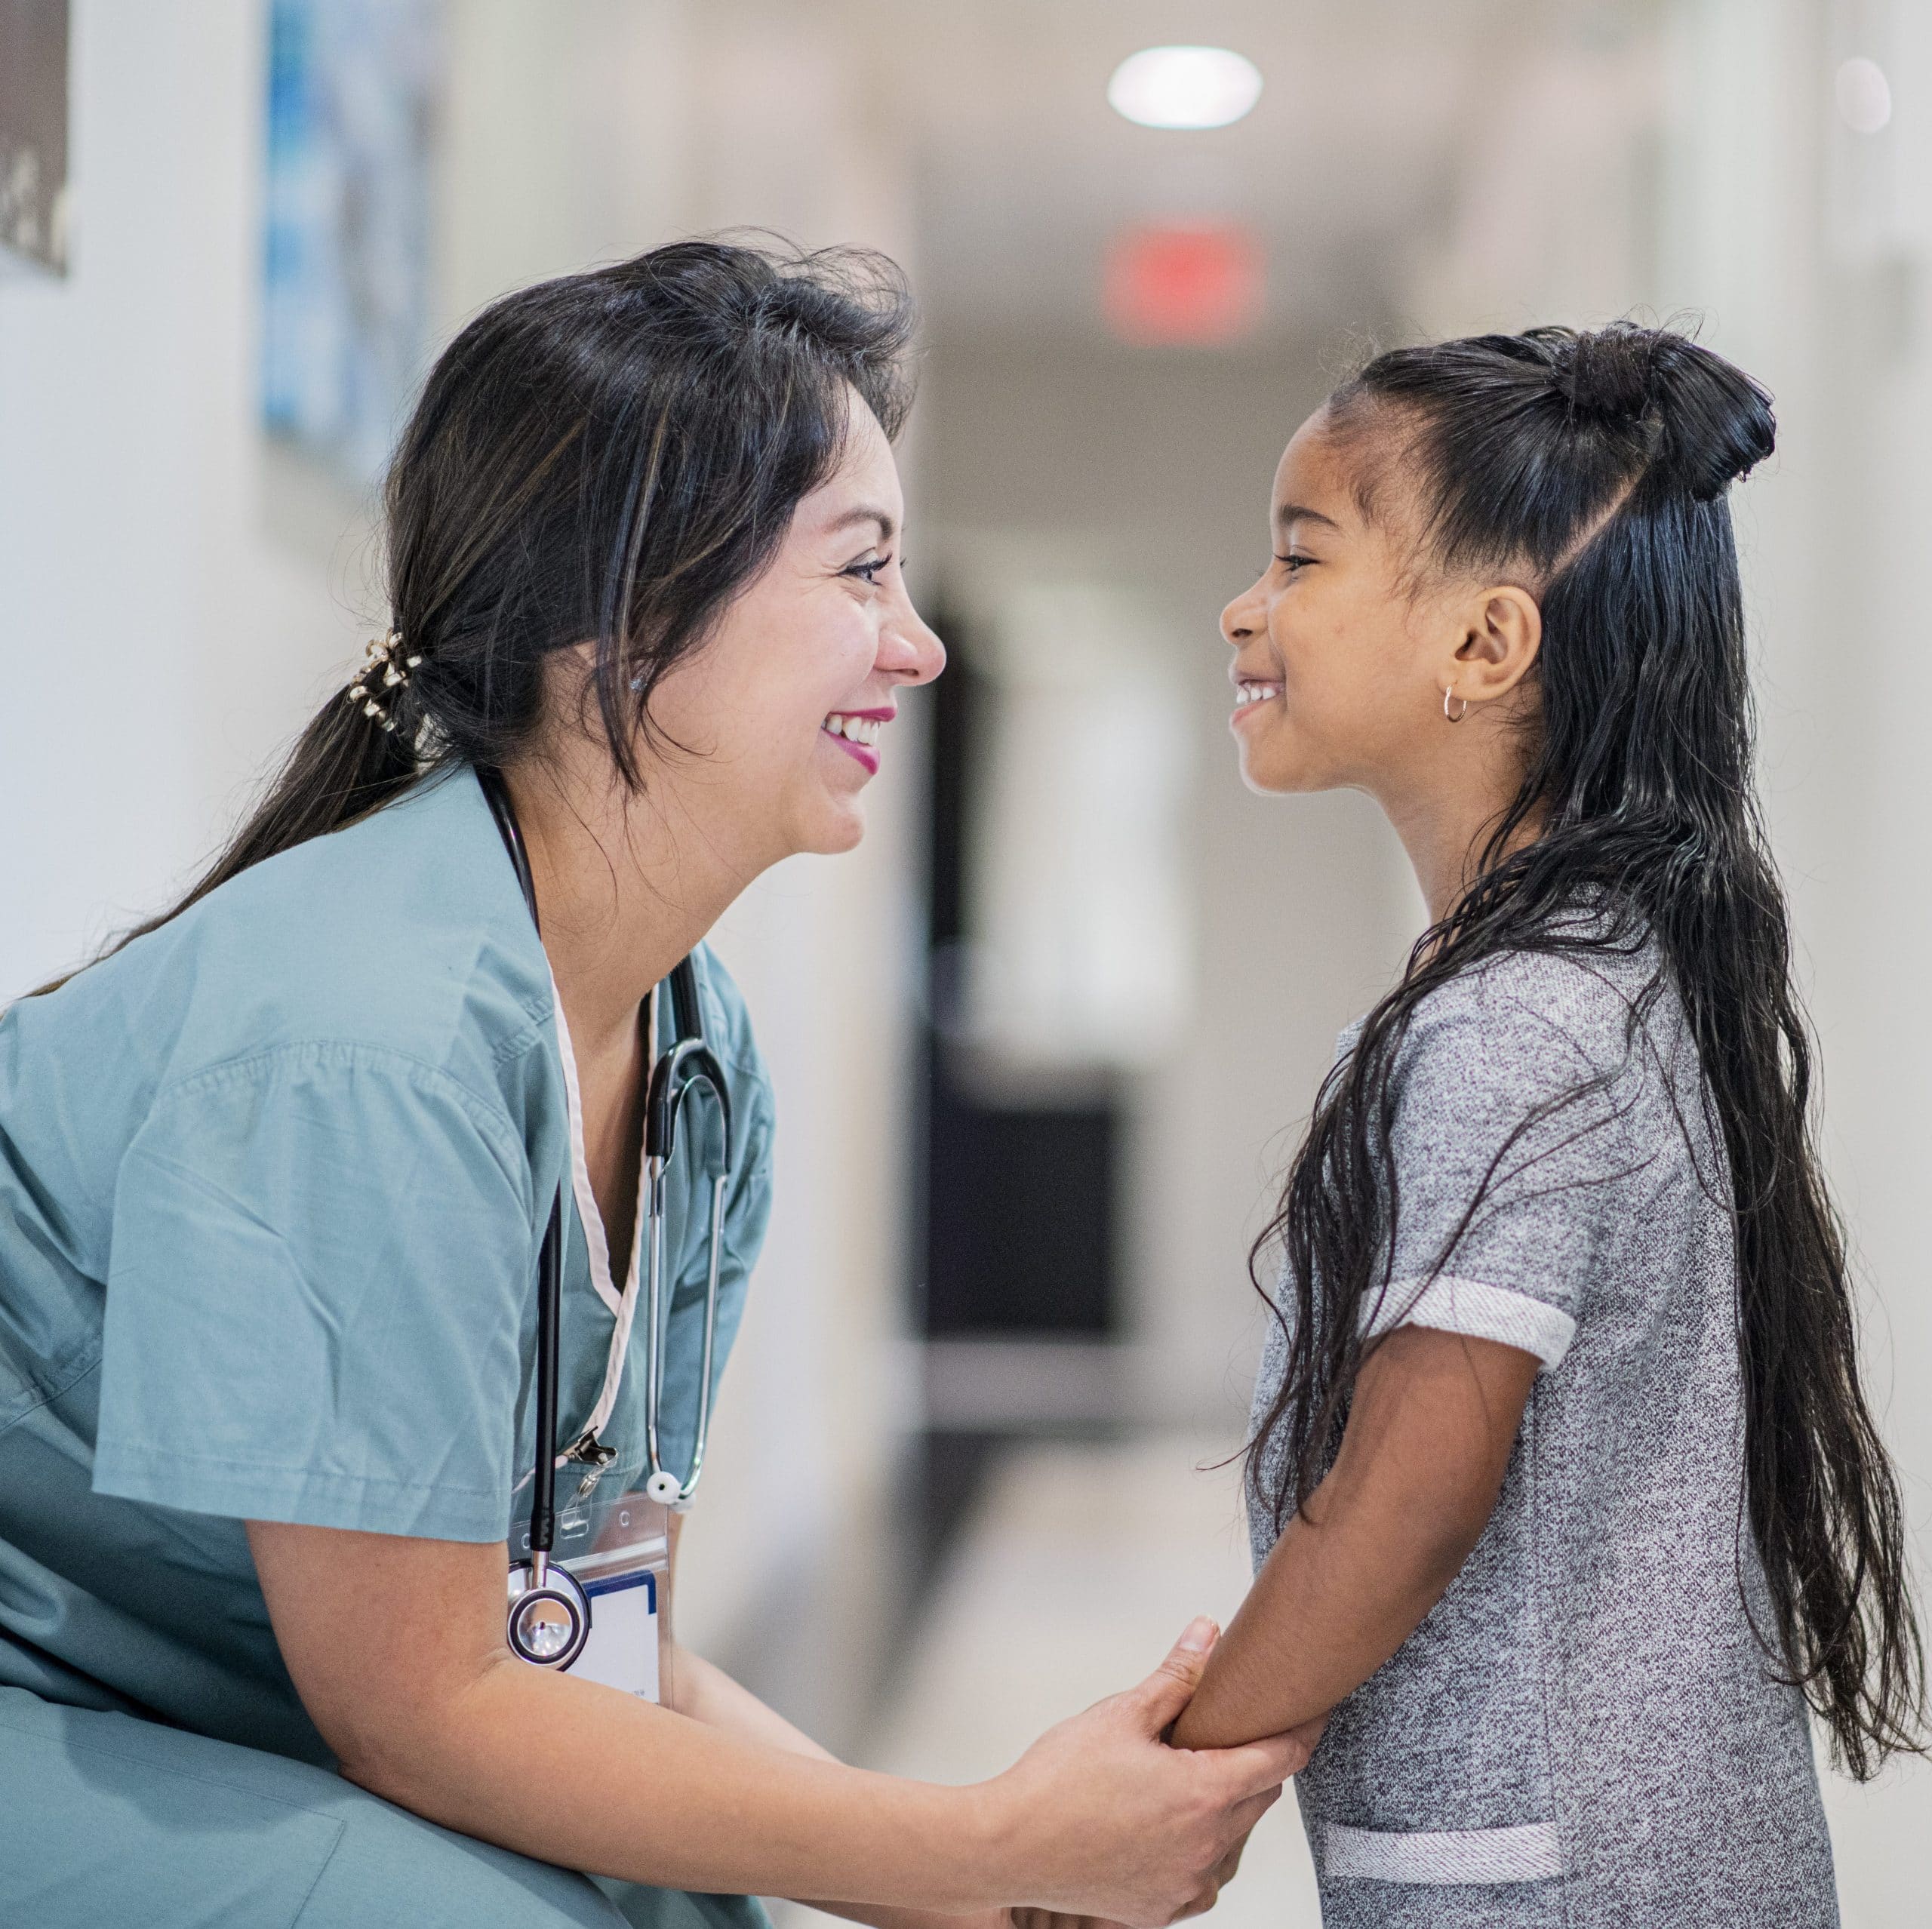 Woman doctor in scrubs, bent down talking to a little girl.